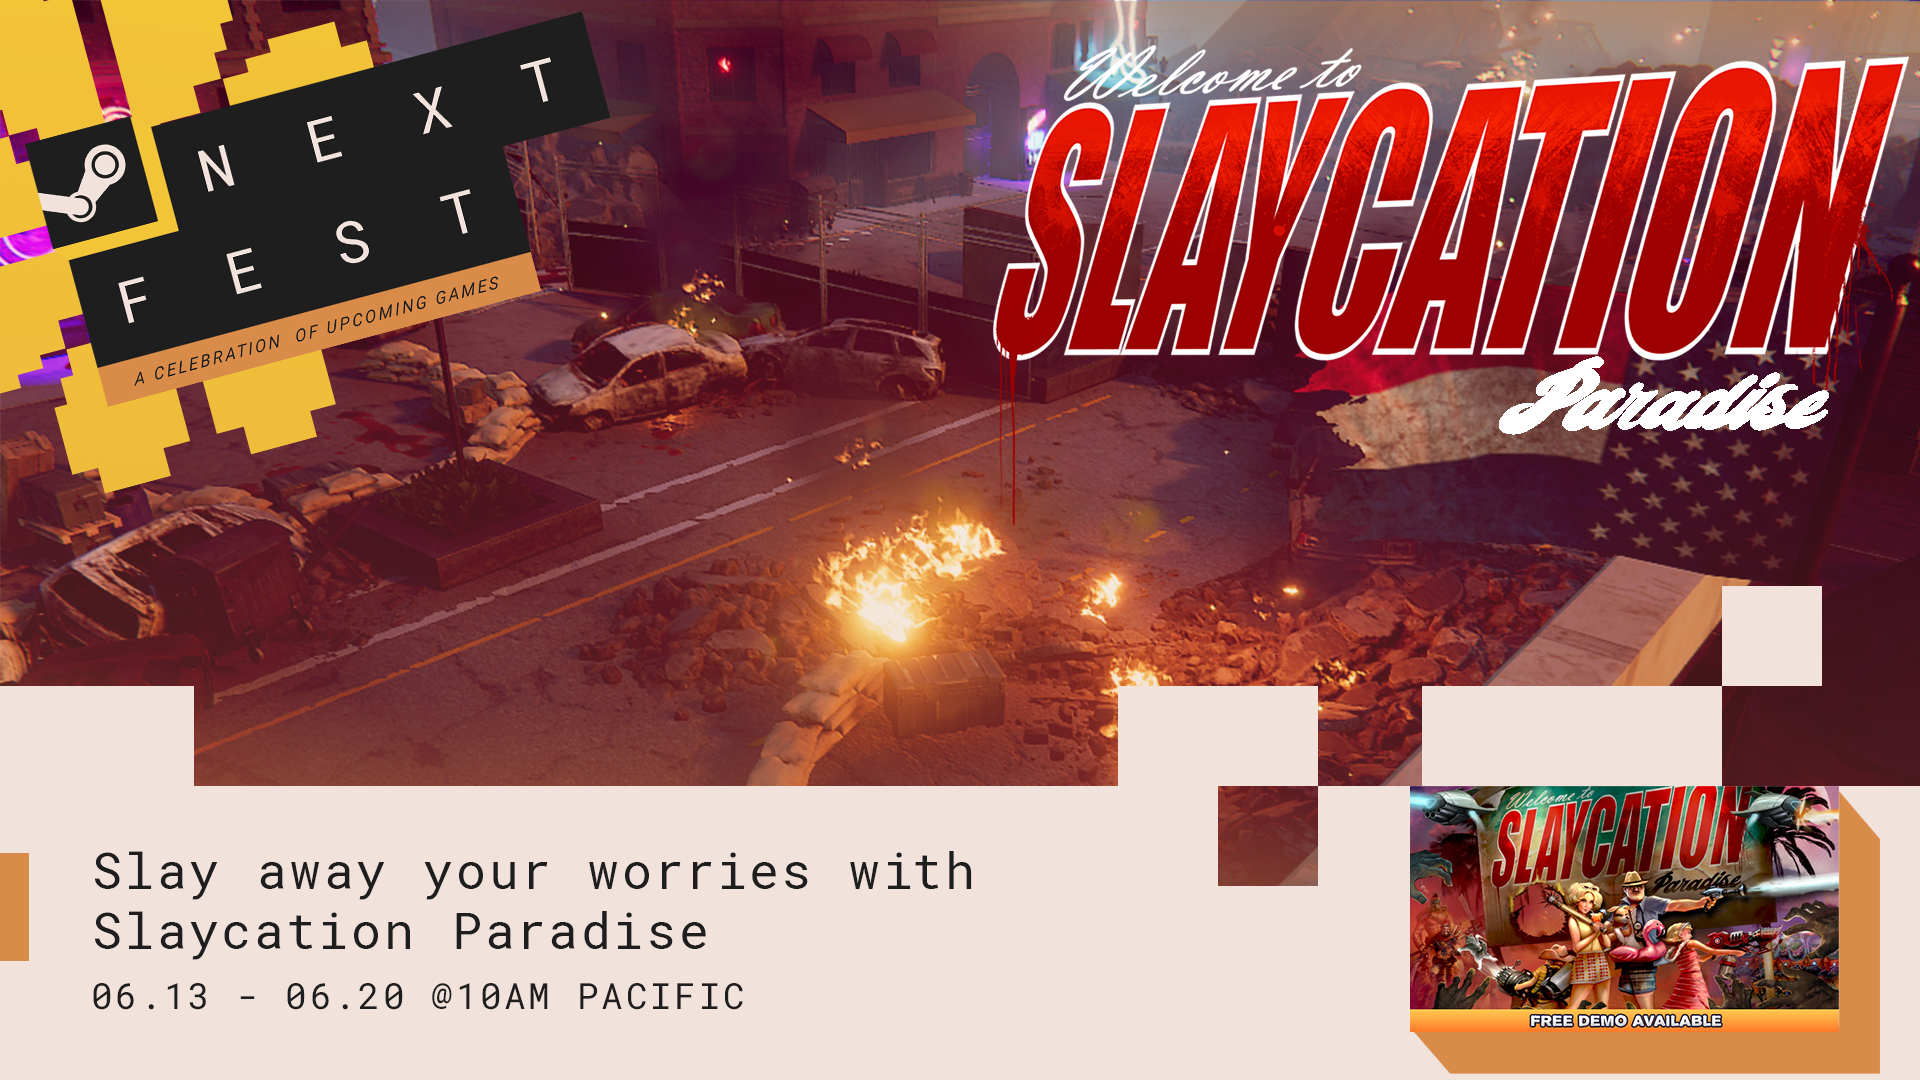 Slaycation Paradise is in Steam Next Fest!